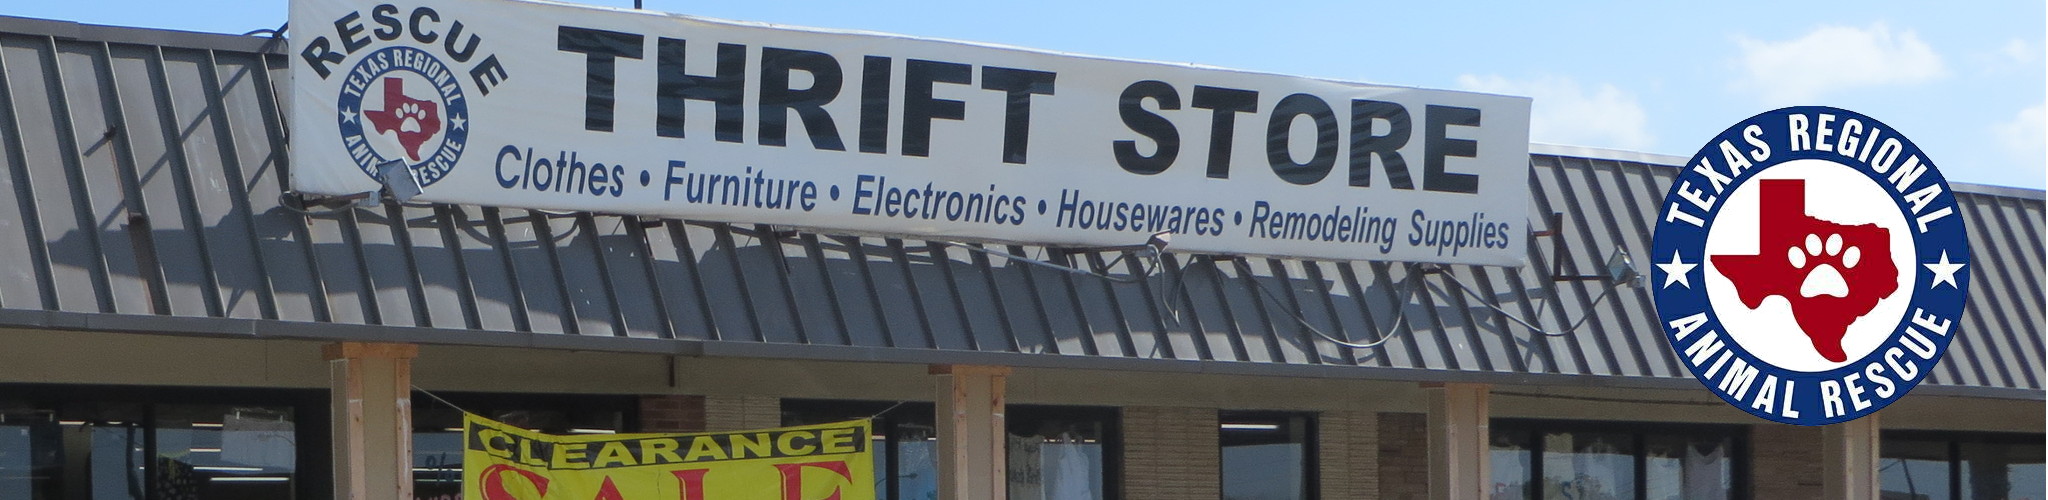 Rescue Thrift Store Storefront